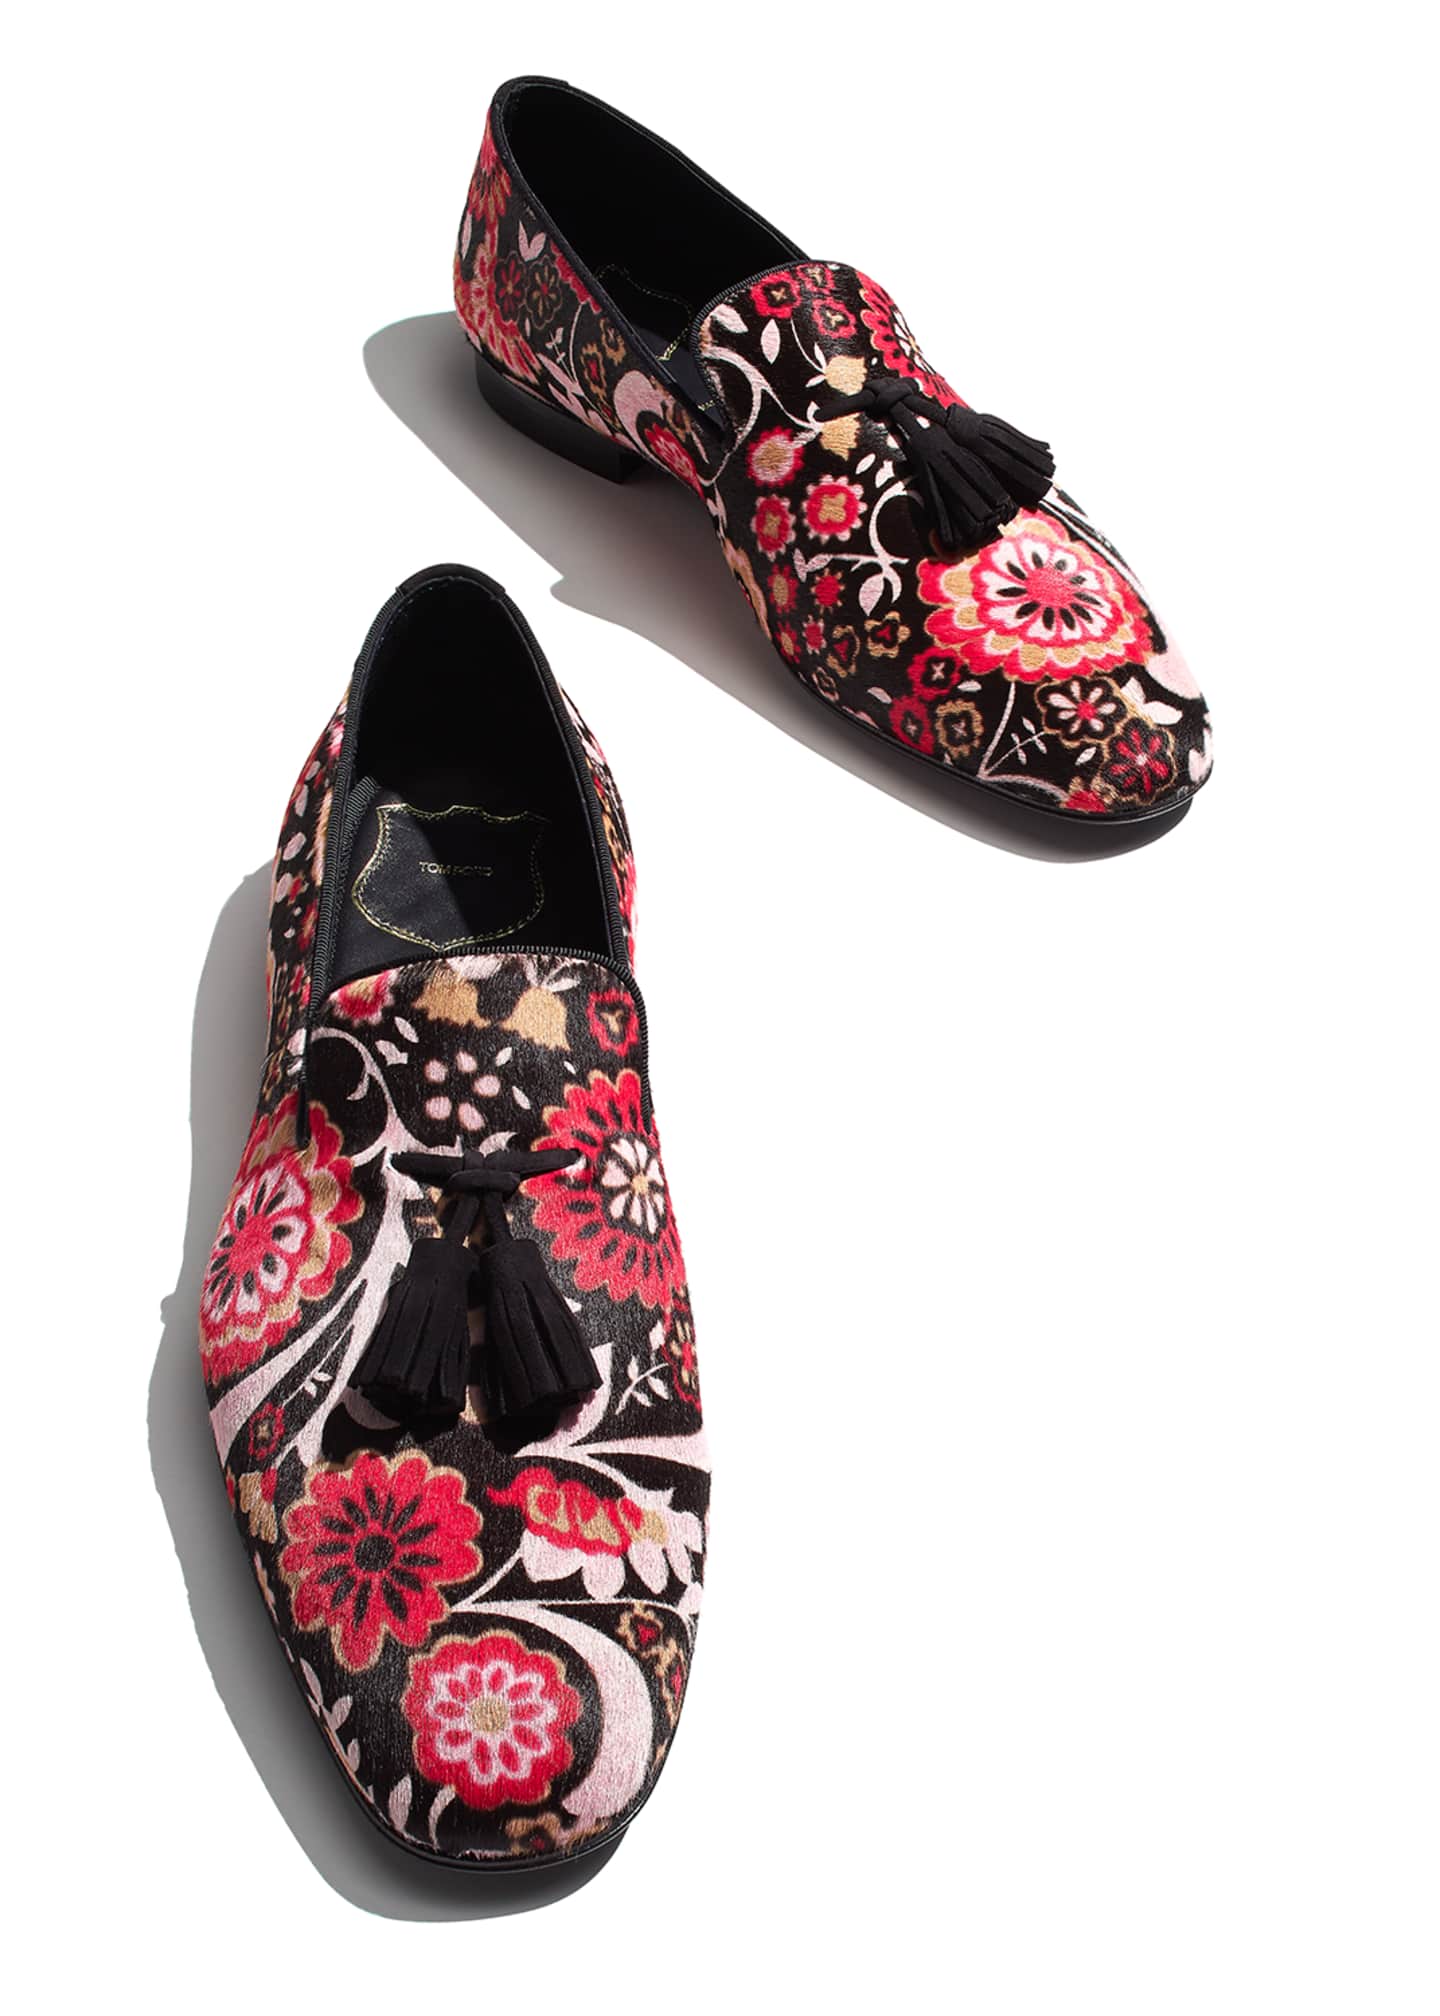 TOM FORD Chesterfield Floral-Print Calf Hair Tassel Loafer - Bergdorf ...